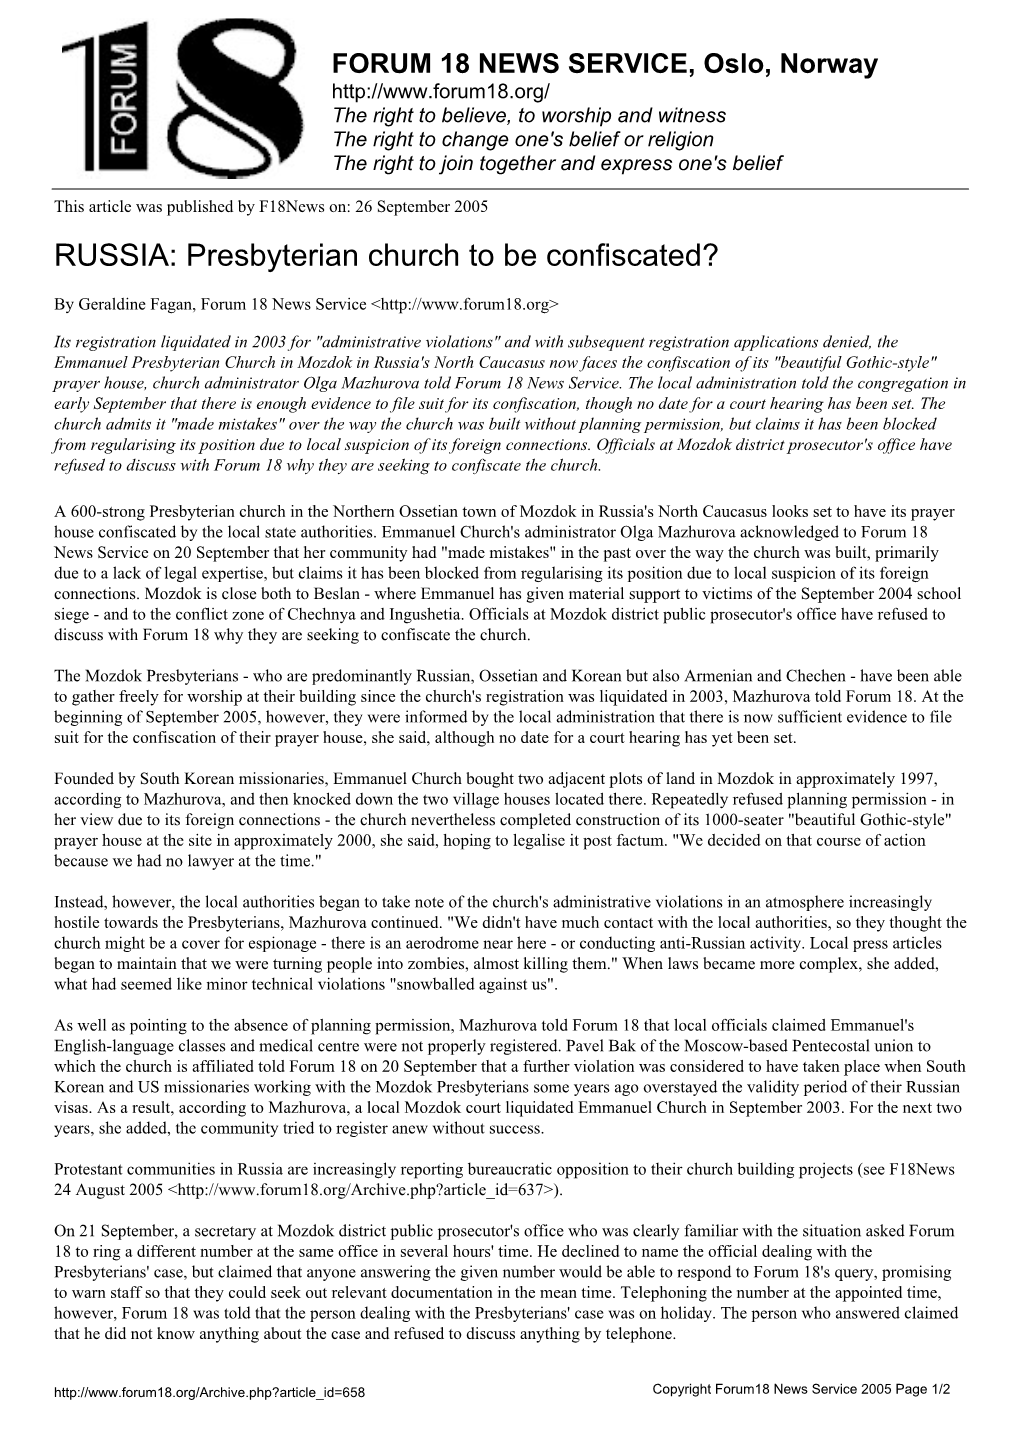 RUSSIA: Presbyterian Church to Be Confiscated?